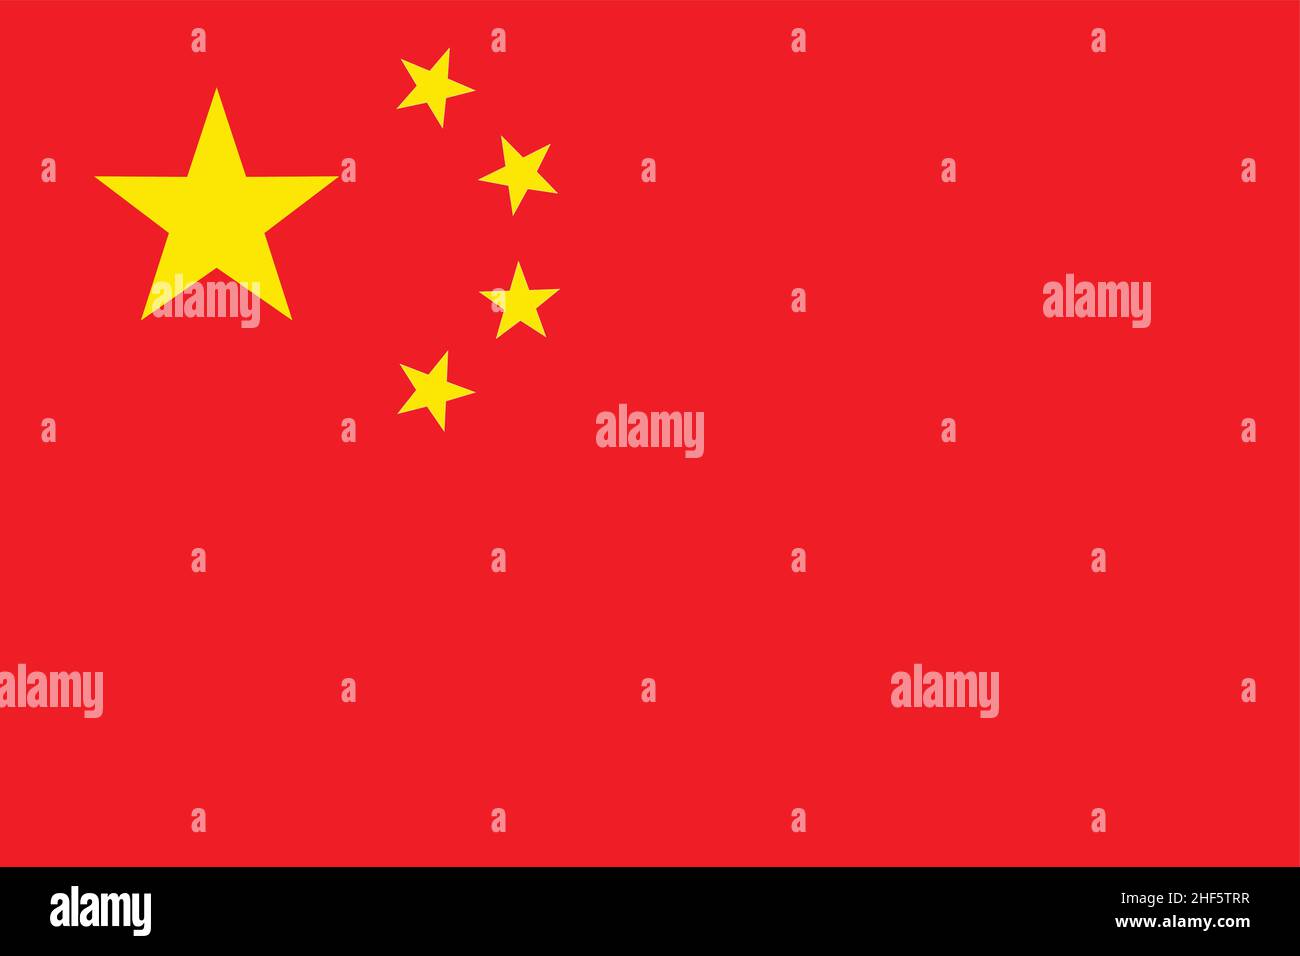 Accurate correct Chinese flag of peoples republic of China prc vector illustration Stock Vector